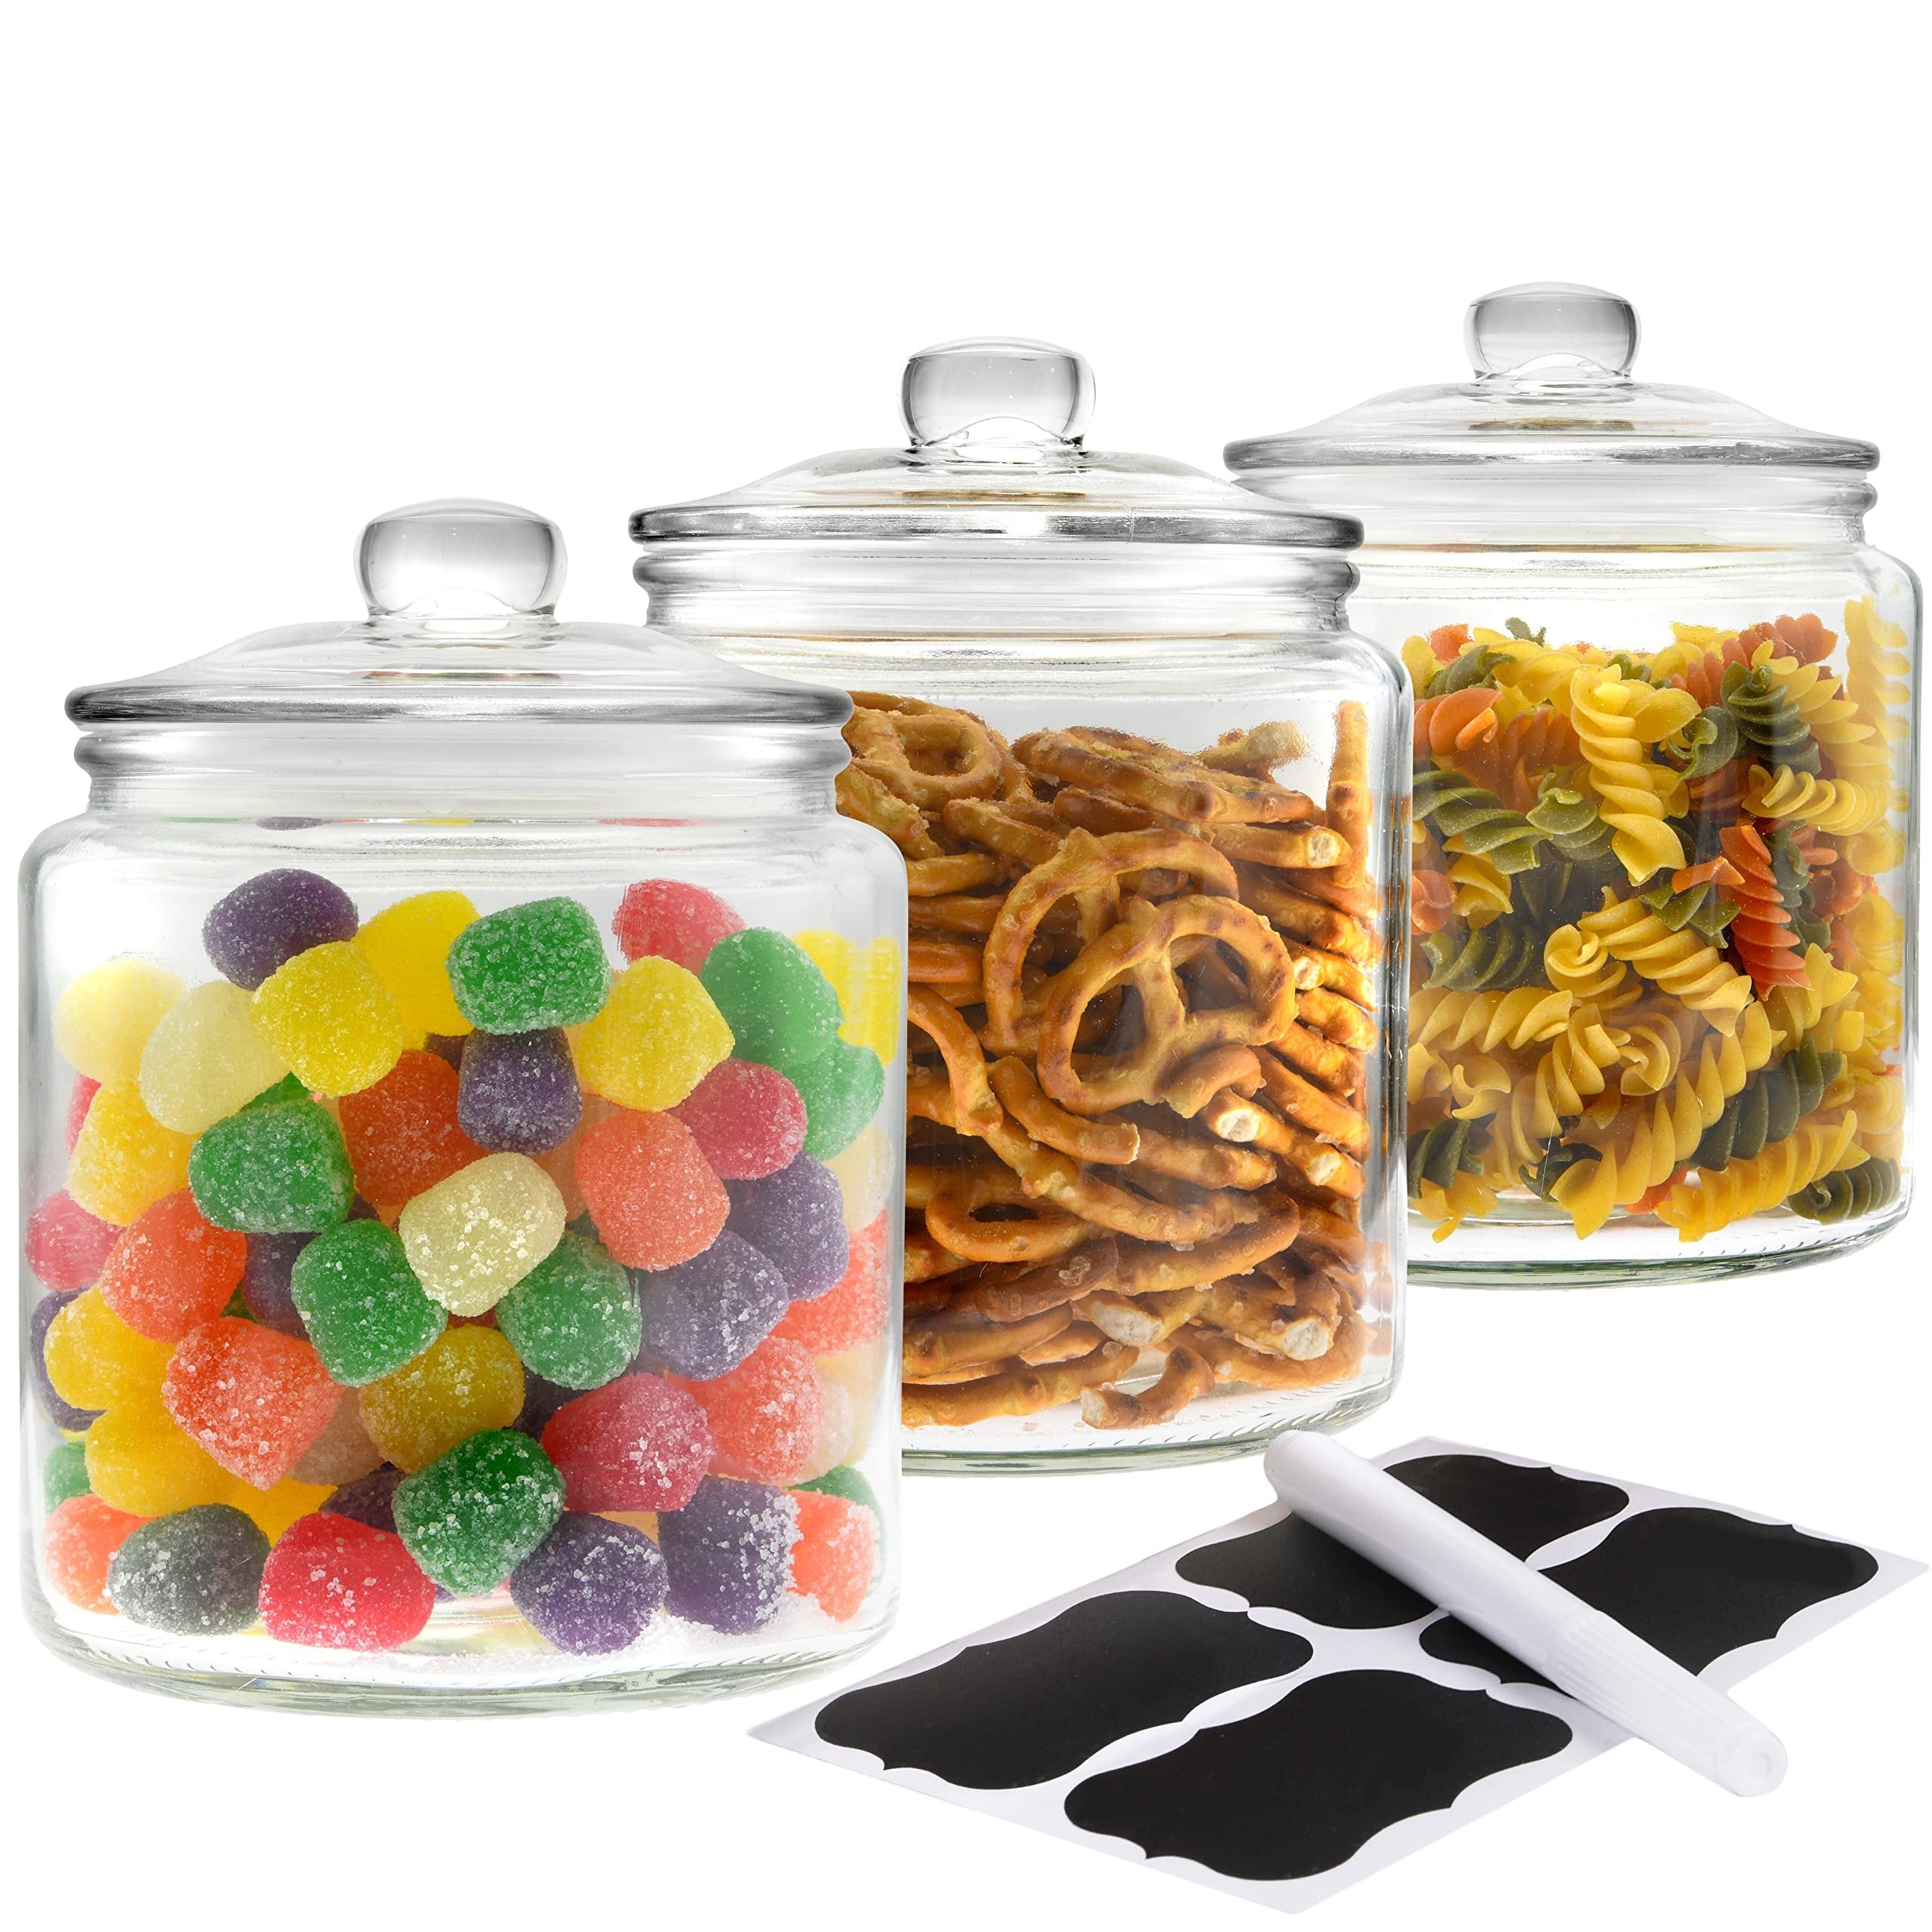 GADGETWIZ Glass Cookie Jar - Glass Apothecary Jars With Lids - Canister Sets For Kitchen Counter - Glass Candy Jars - Glass Canisters Set Of 3 - Sugar Containers For Countertop (3 pack 32oz)